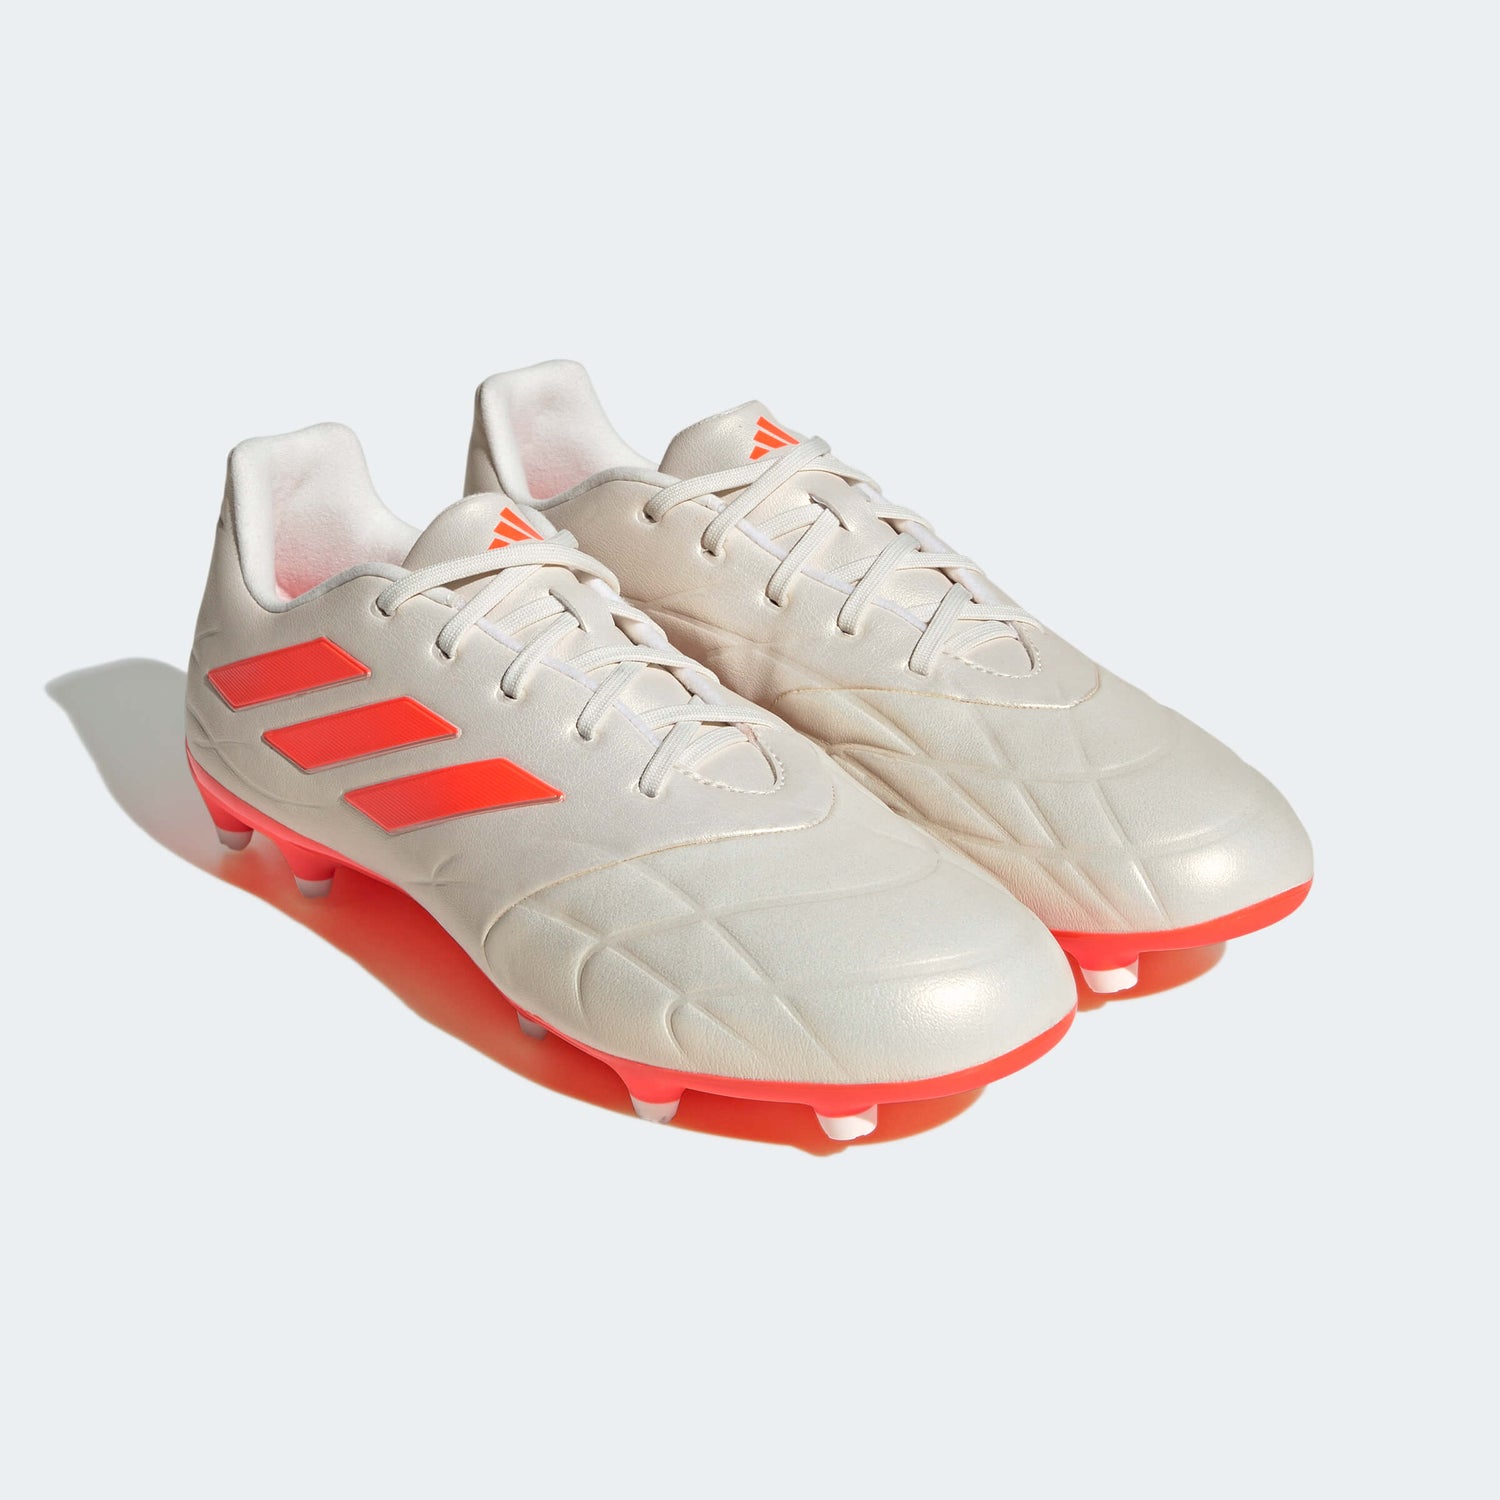 adidas Copa Pure.3 FG - Heatspawn Pack (SP23) (Pair - Front Lateral)